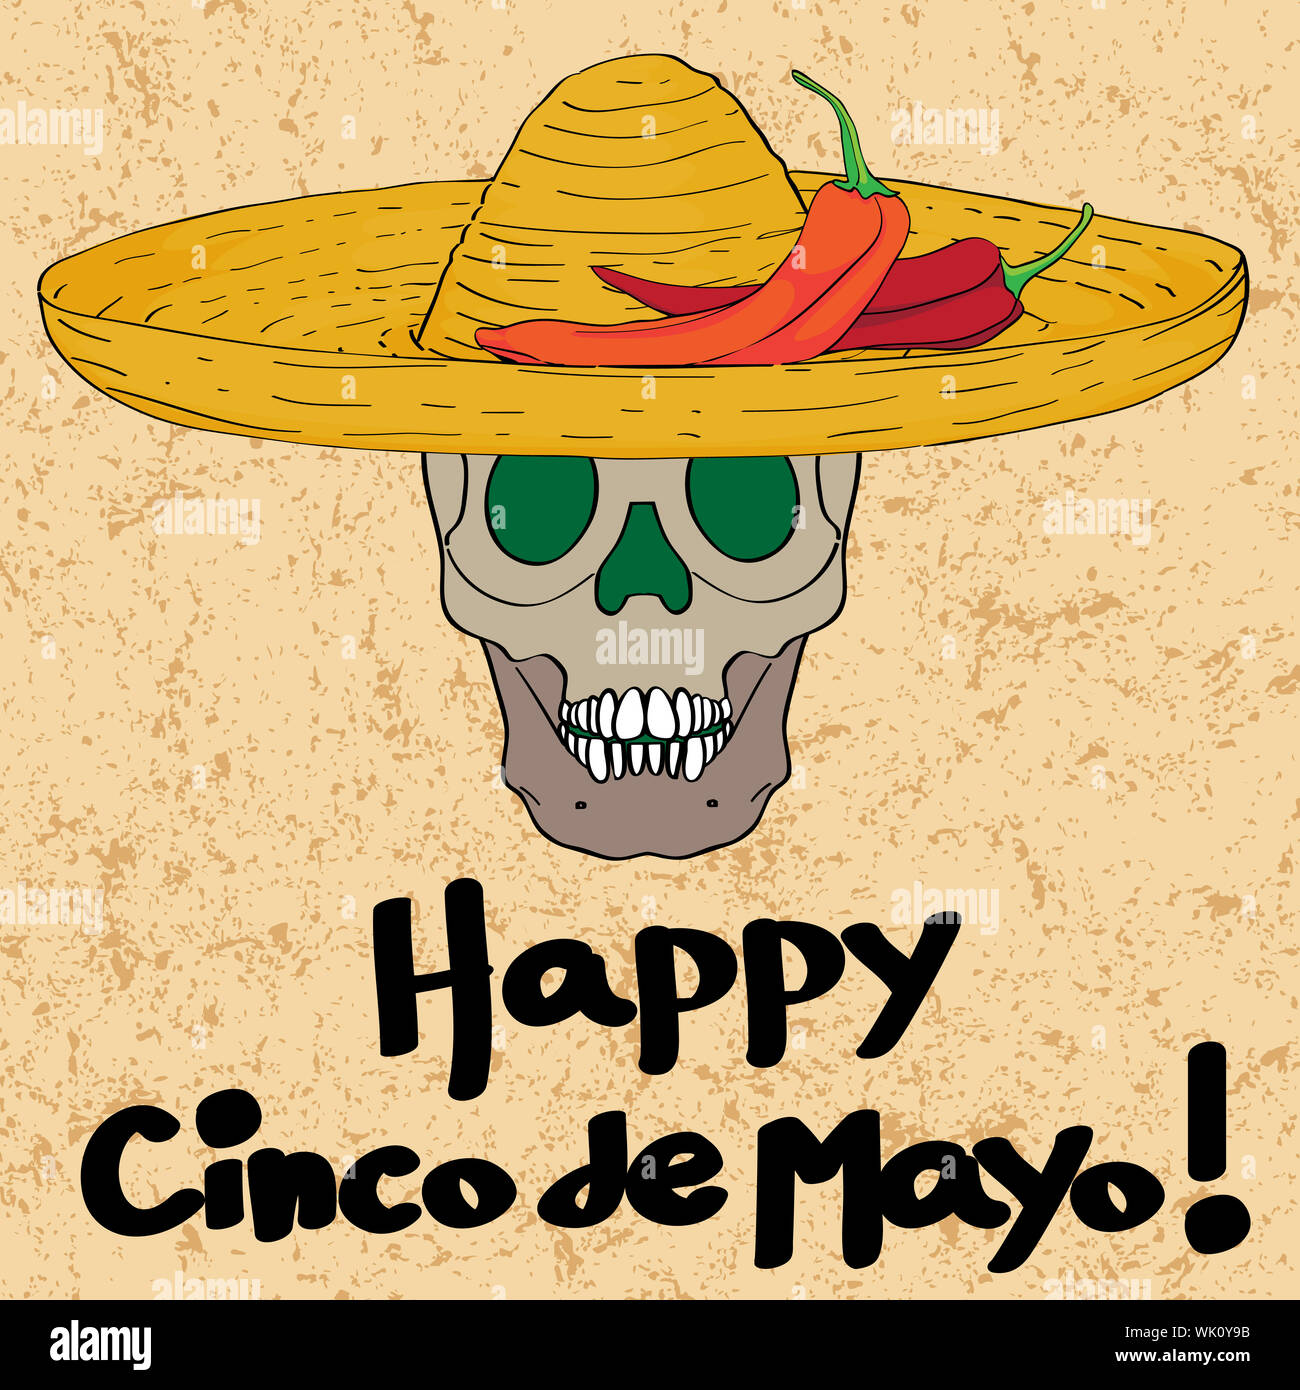 Cinco de mayo hand drawn cartoon illustration of a greeting card with a funny skull with sombrero hat and peppers oven a grungy background Stock Photo